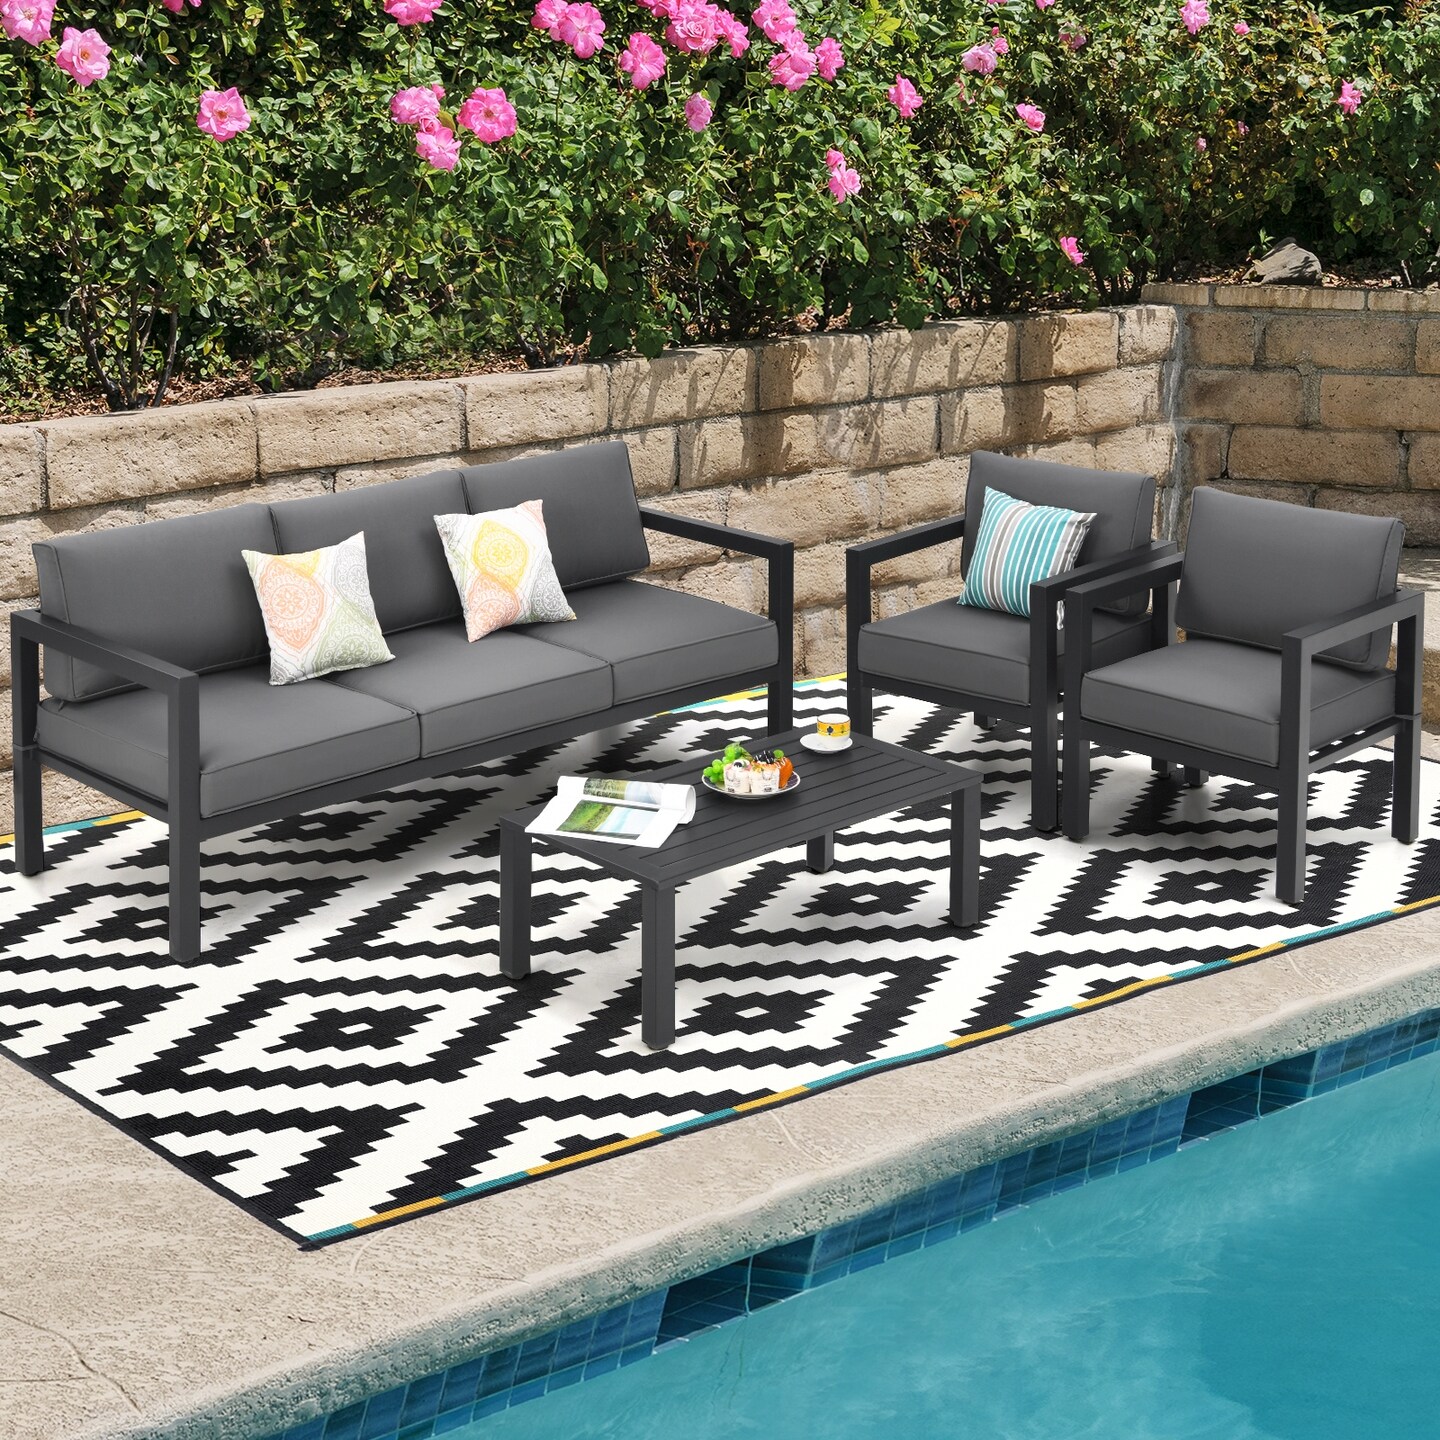 4 Pieces Outdoor Furniture Set for Backyard and Poolside-Gray